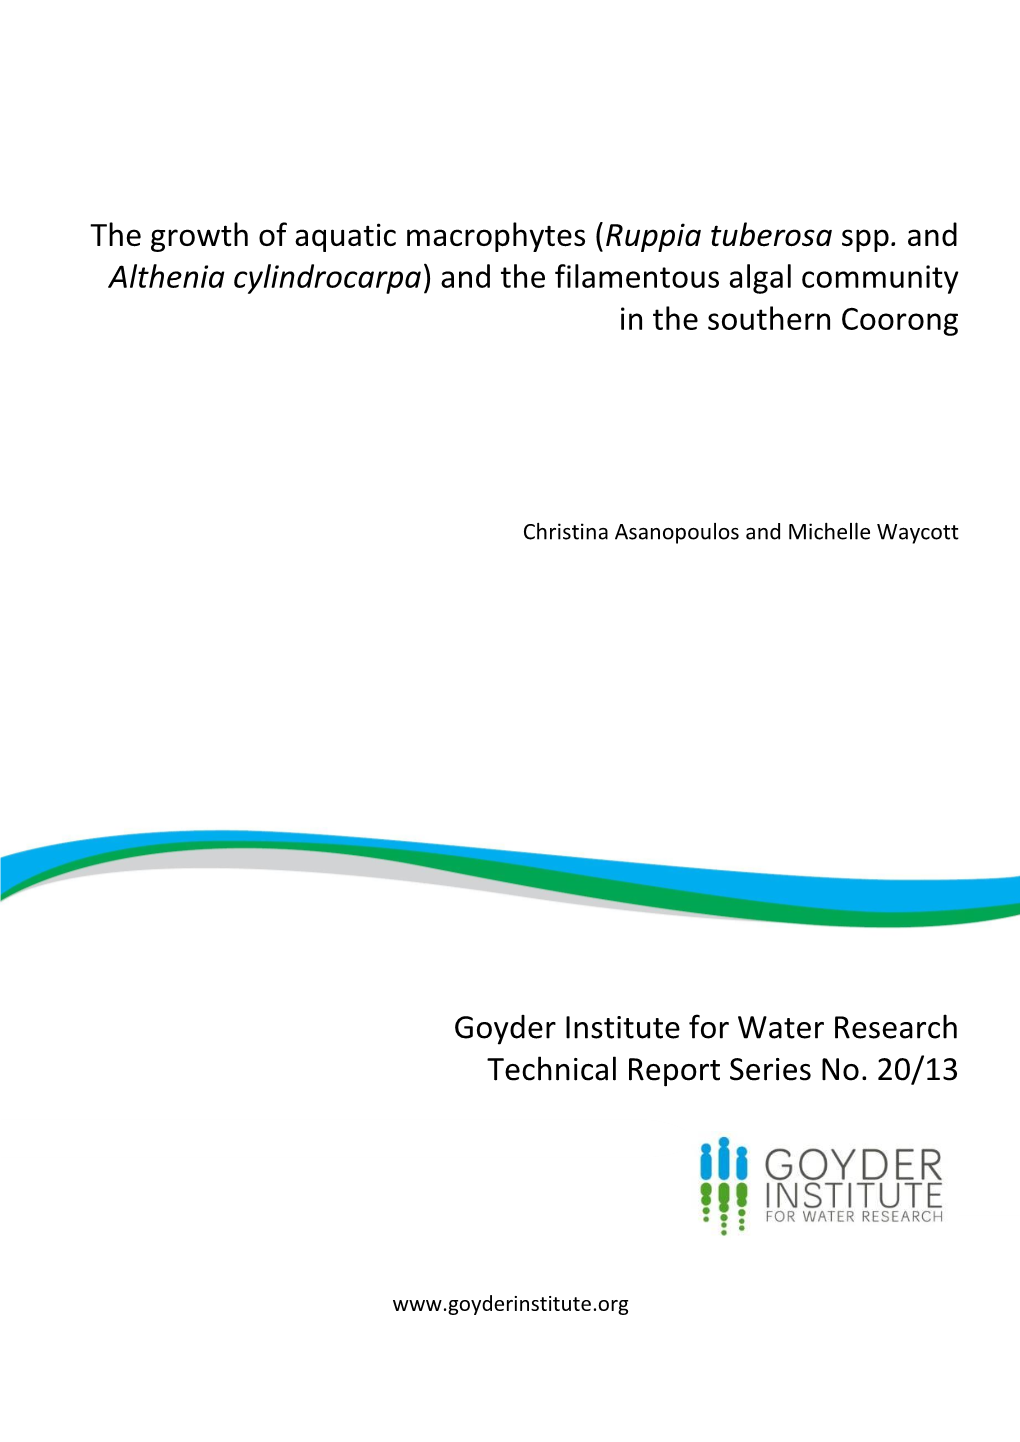 The Growth of Aquatic Macrophytes (Ruppia Tuberosa Spp. and Althenia Cylindrocarpa) and the Filamentous Algal Community in the Southern Coorong